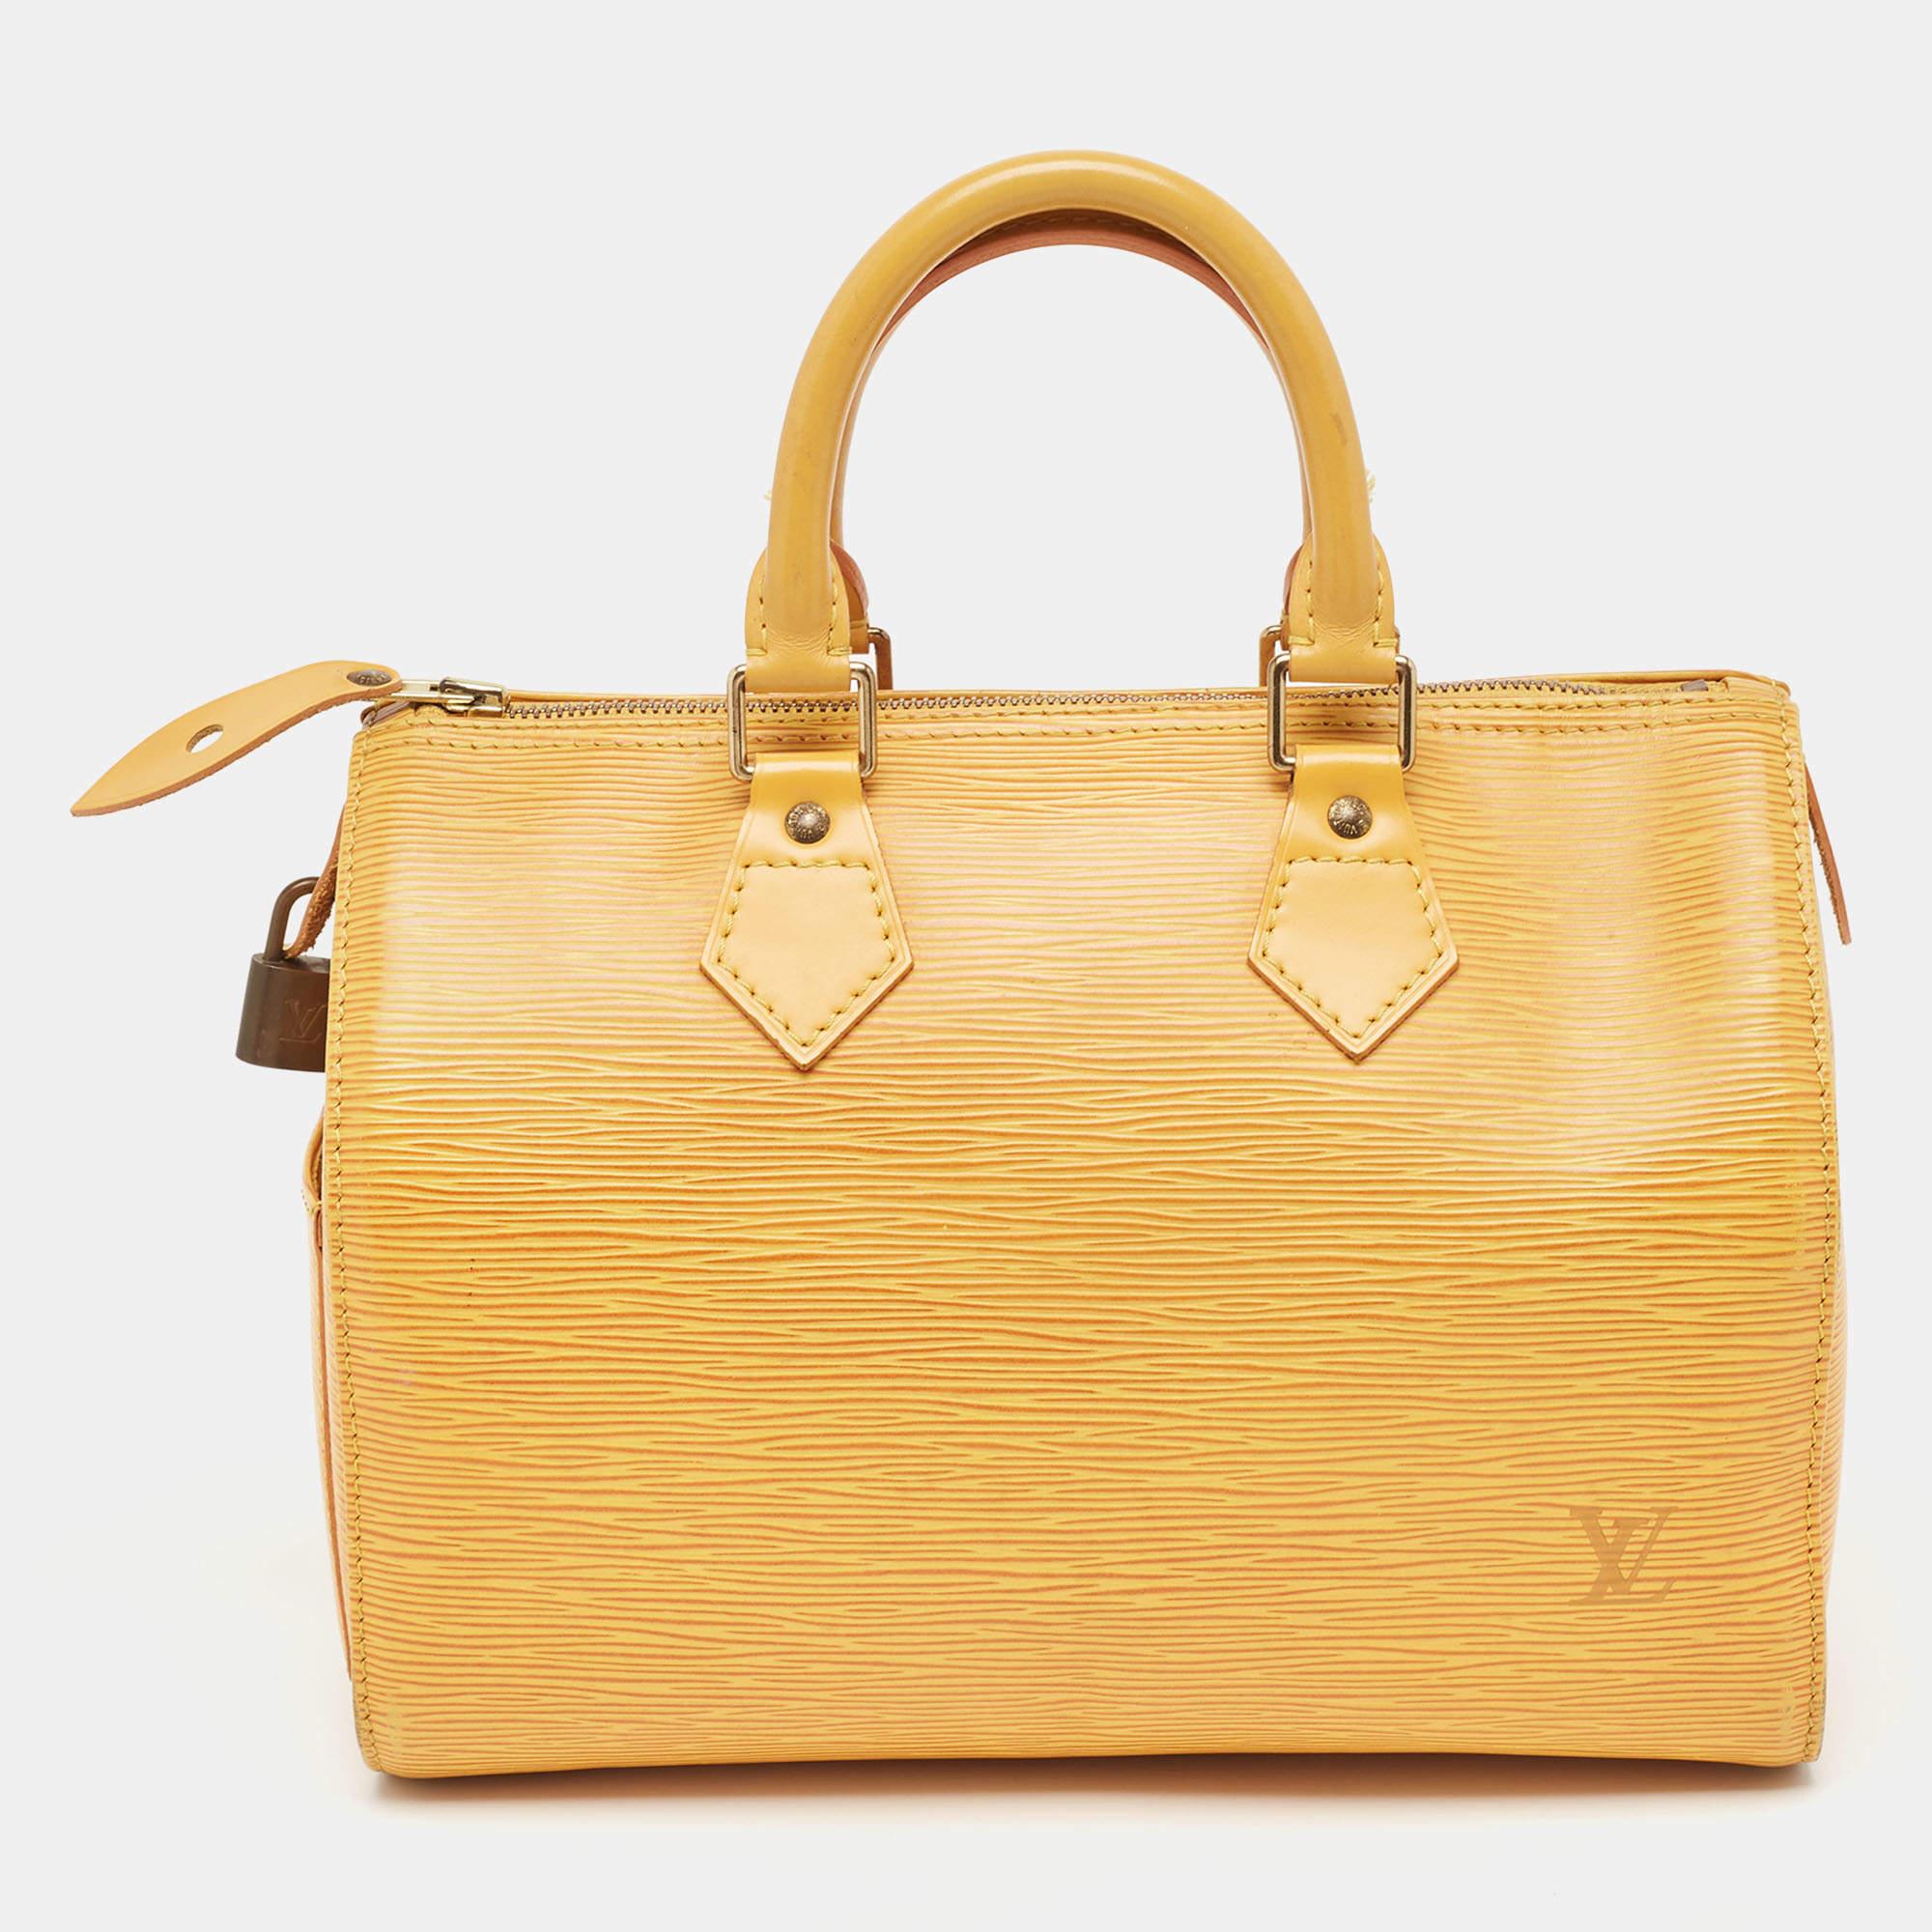 Ensure your day's essentials are in order and your outfit is complete with this LV Speedy 25 bag. Crafted using the best materials, the bag carries the maison's signature of artful craftsmanship and enduring appeal.

Includes: Padlock(no keys)